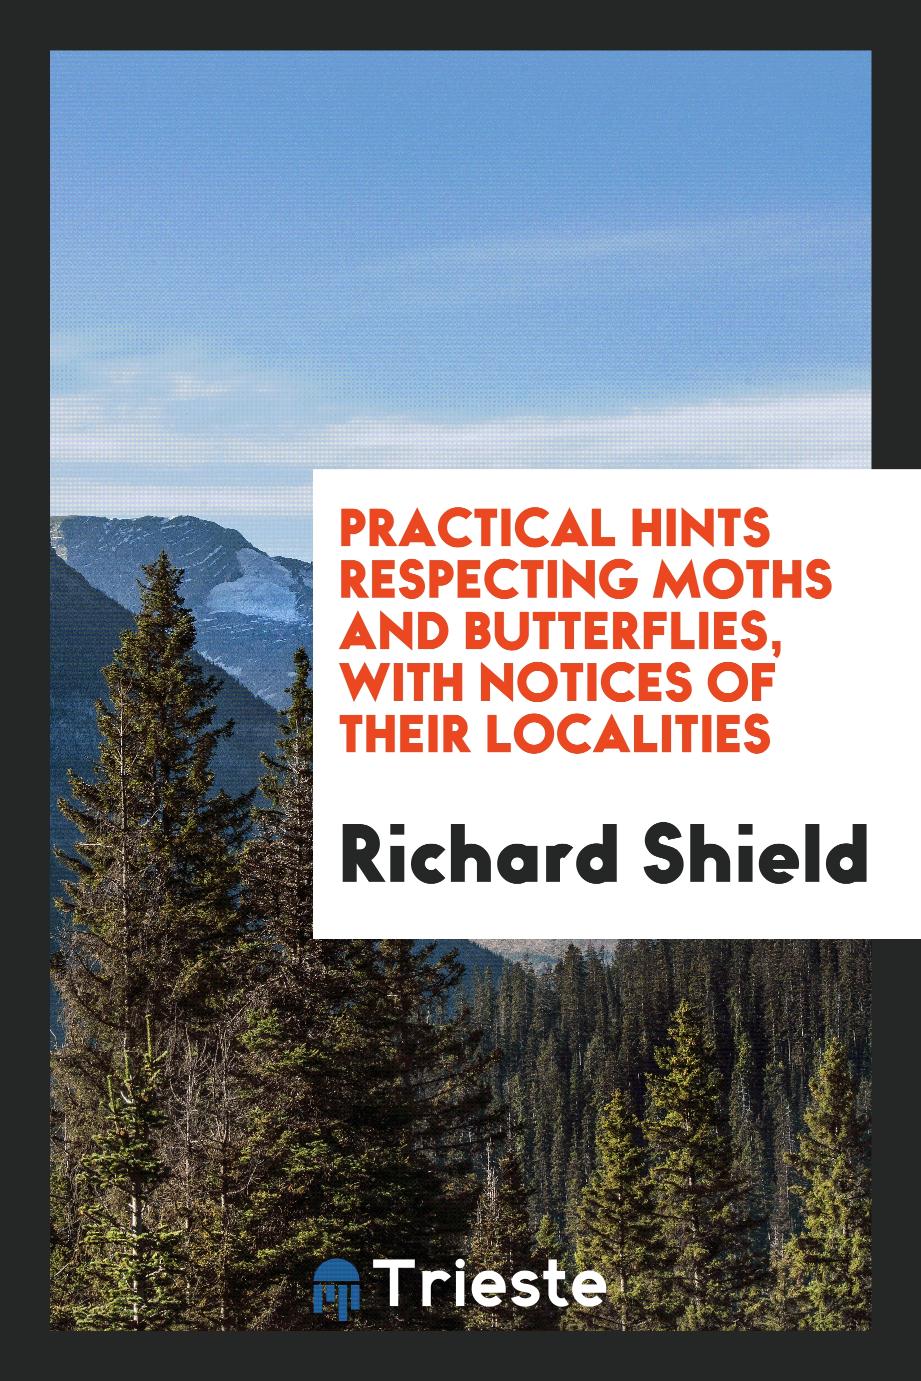 Practical hints respecting moths and butterflies, with notices of their localities